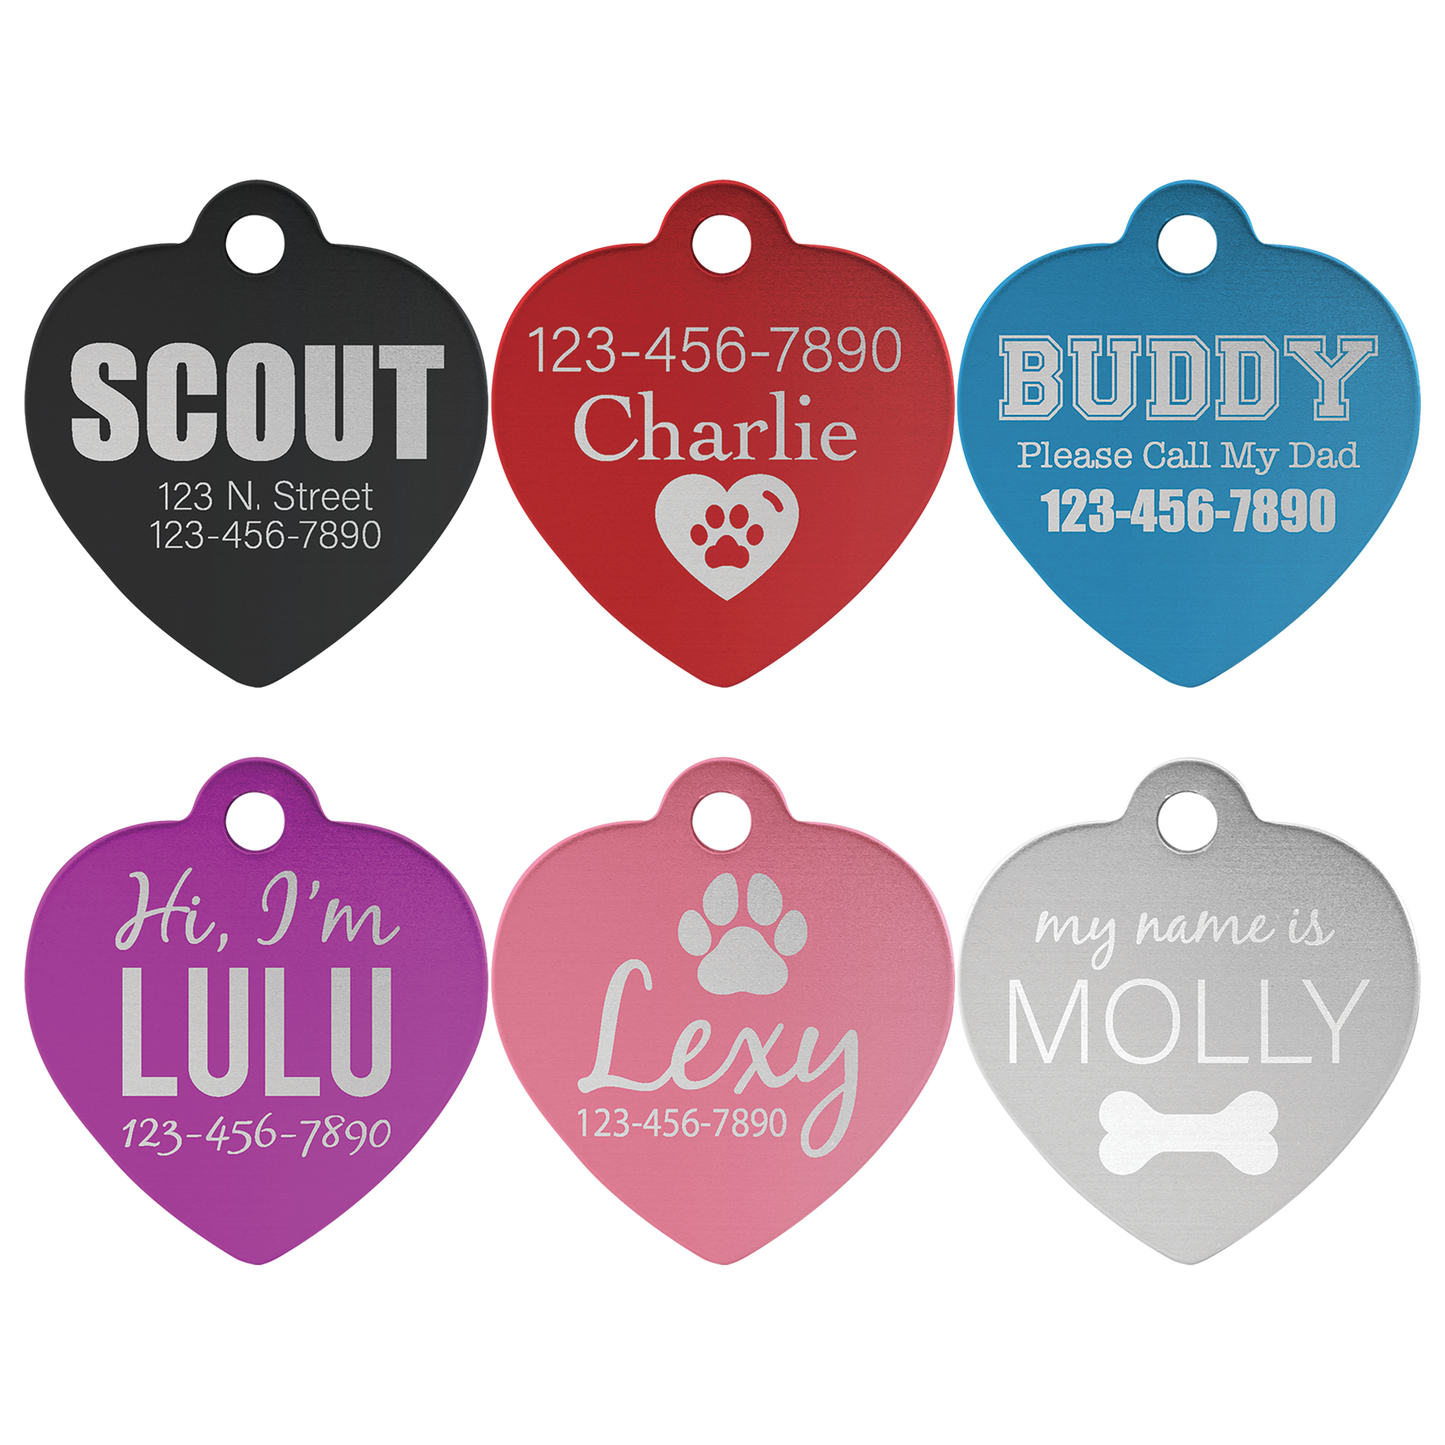 B.O.G.O. LARGE 1 1/4" x 1 1/4" Red Anodized Aluminum Heart Pet Tag